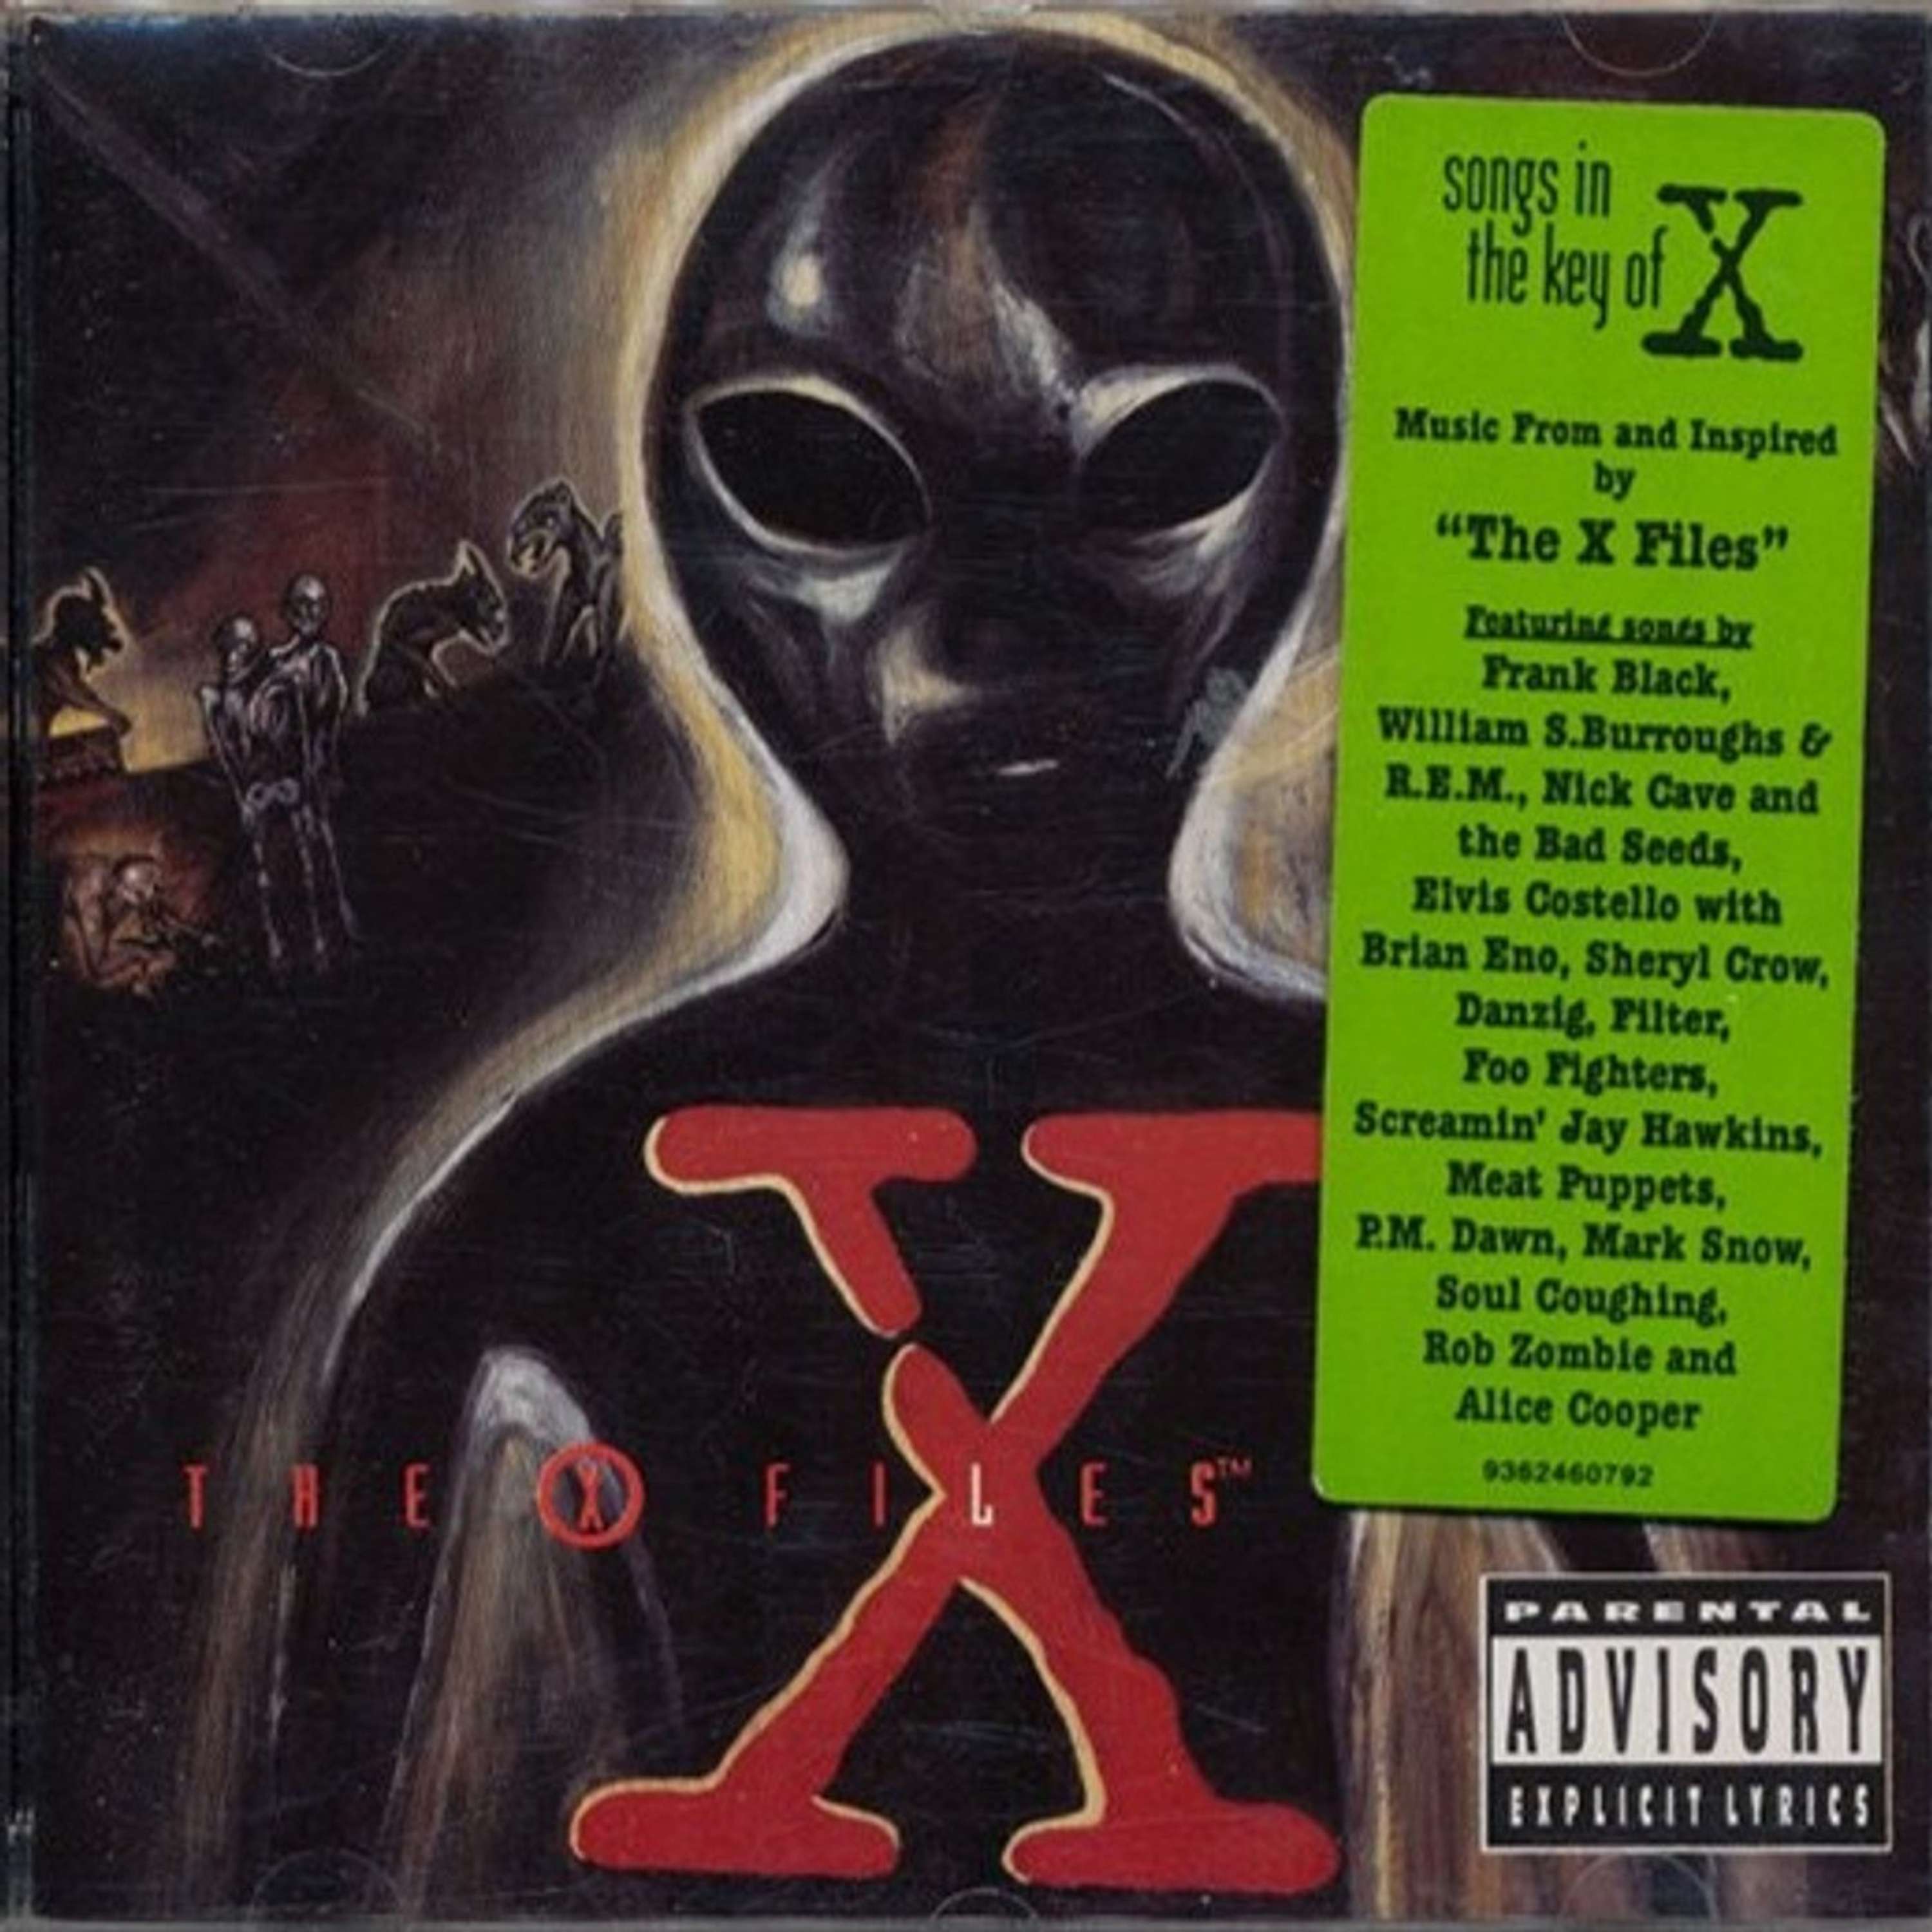 Free With This Months Issue 62.5 - X-Cast Crossover - The X Files Songs In the Key Of X - Bonus Episode